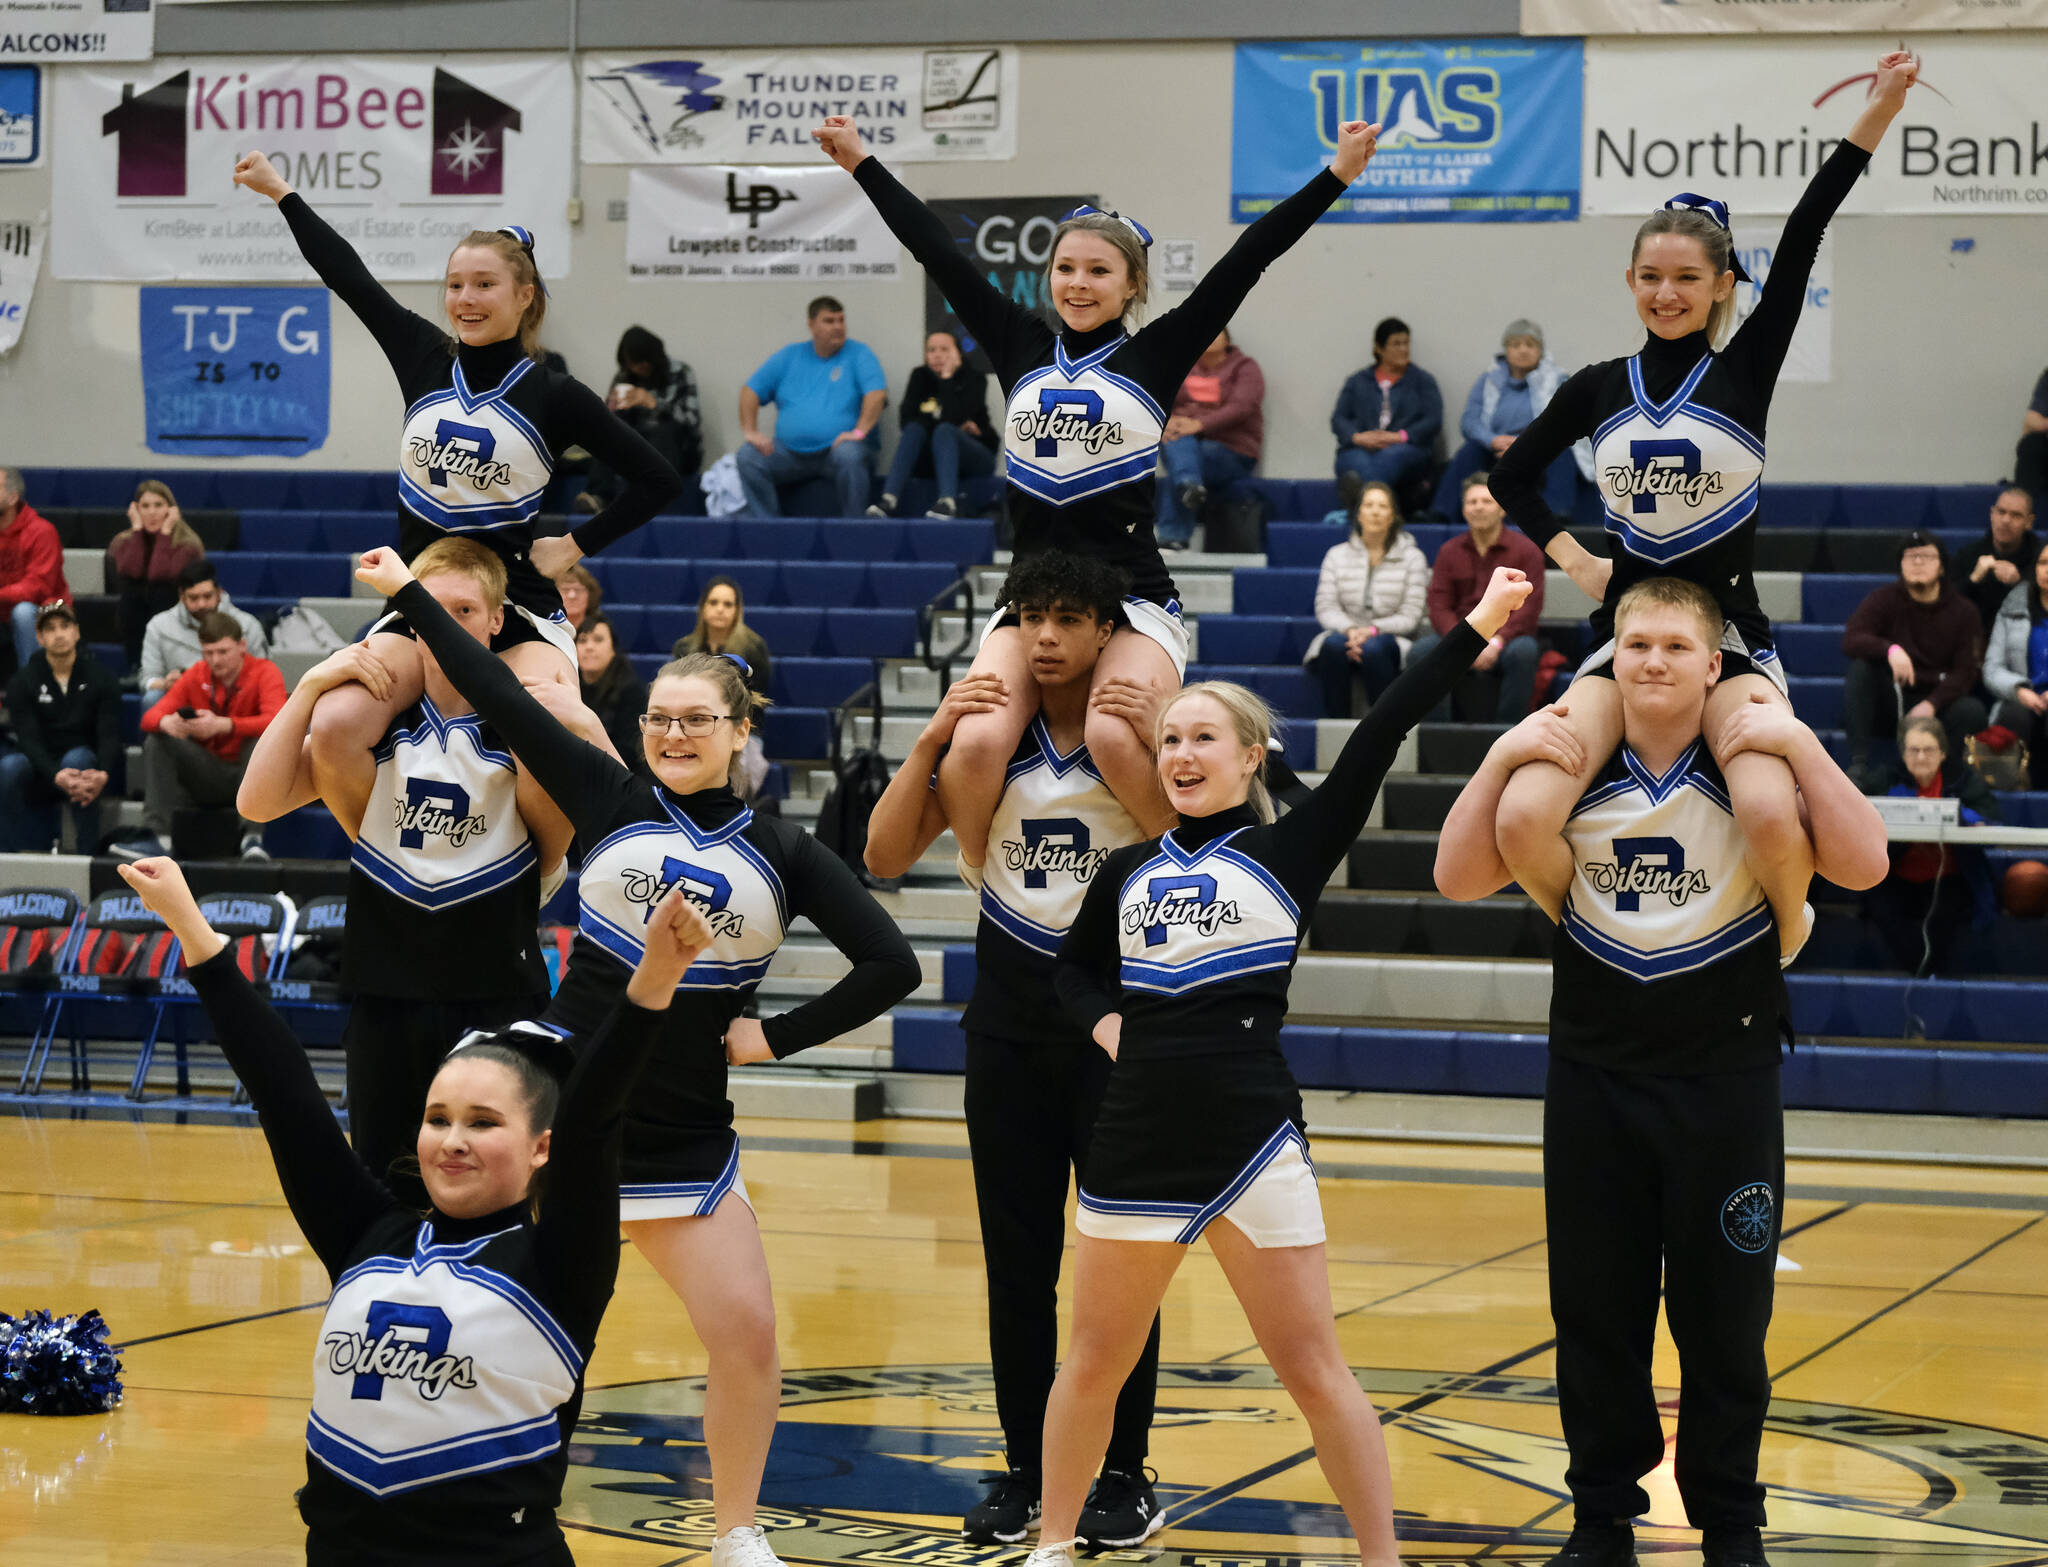 Members of the Petersburg Cheer team perform Wednesday at the Region V tournament. (Klas Stolpe / For the Juneau Empire)